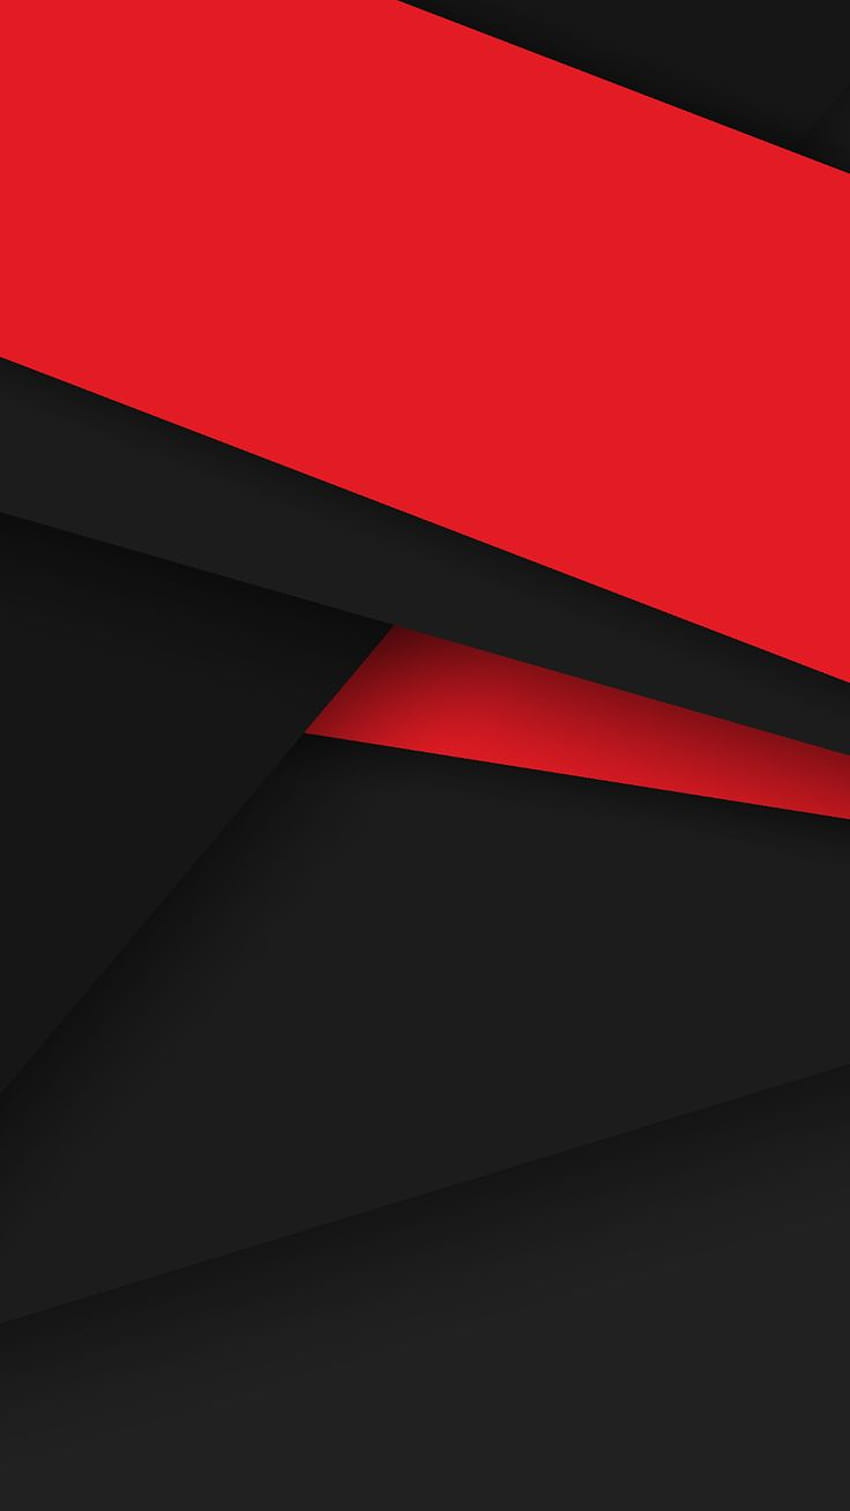 Gallery Red And Black Material Design Mobile . Red And Black , Black , Gaming , Black for Mobile HD phone wallpaper